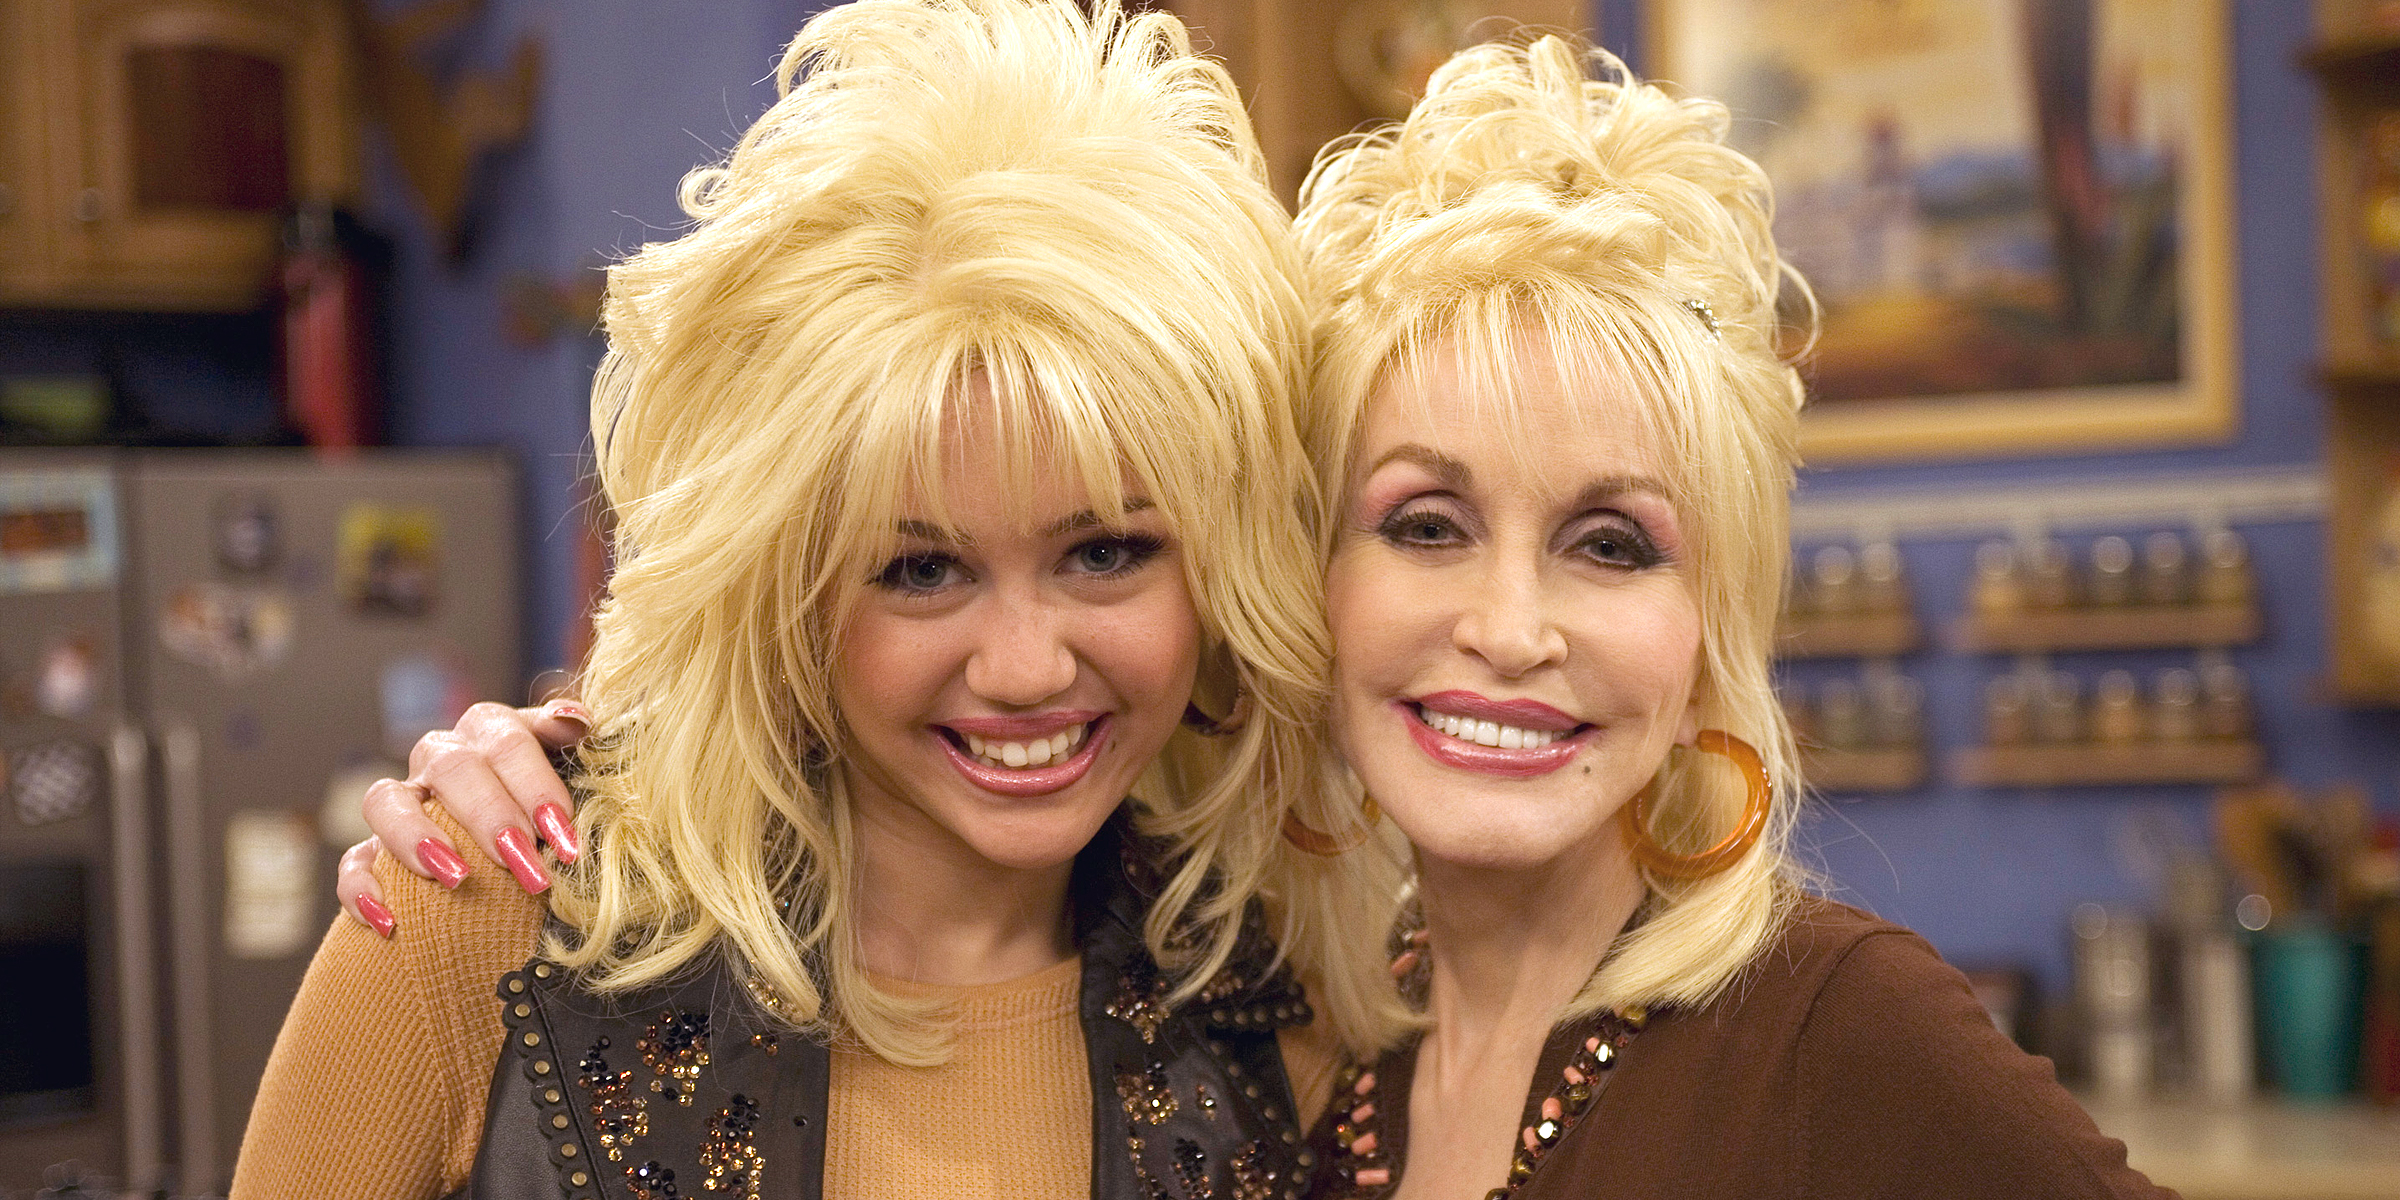 Miley Cyrus and Dolly Parton | Source: Getty Images